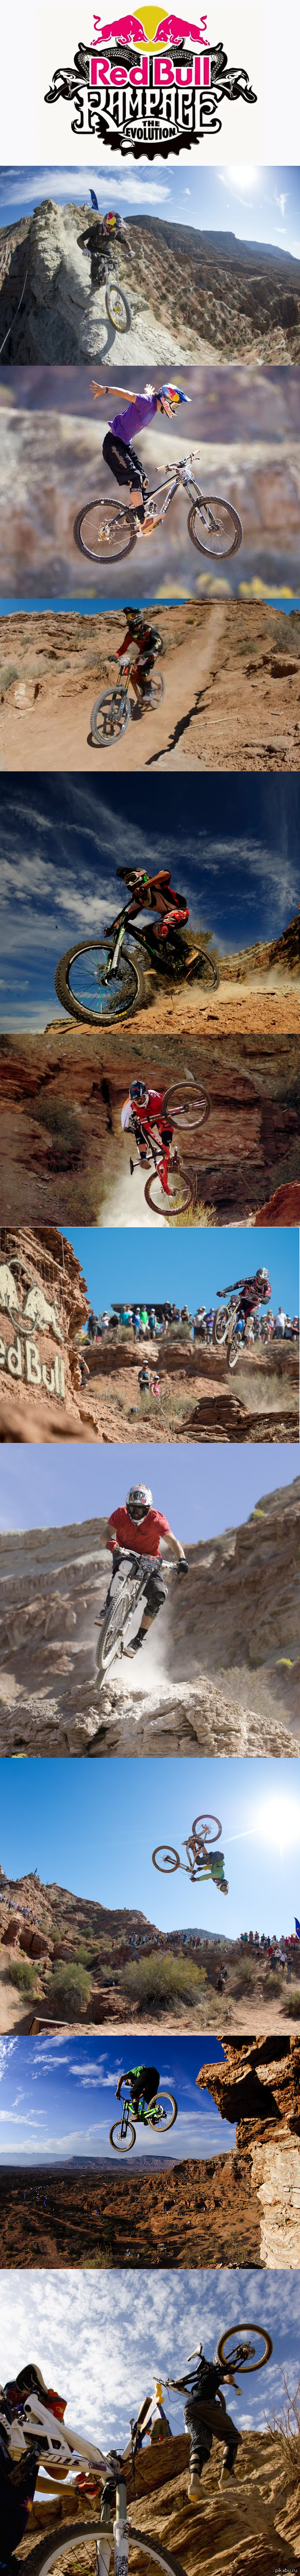 Red Bull Rampage           ,     .    ,   ?   .